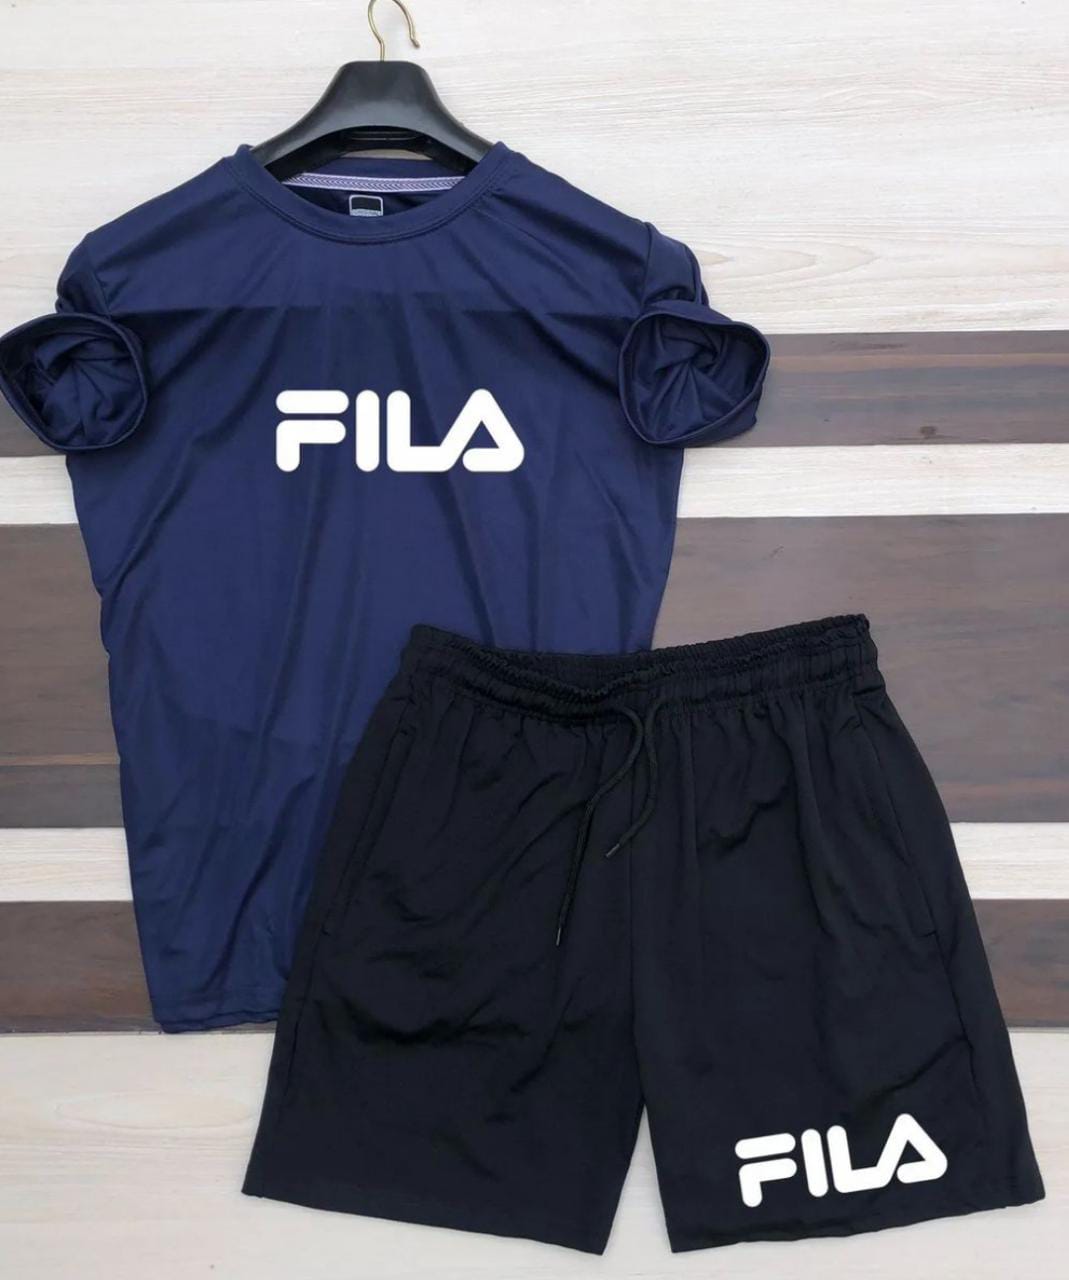 Details View - Fila T-Shirt and Shorts photos - reseller,reseller marketplace,advetising your products,reseller bazzar,resellerbazzar.in,india's classified site,Fila T-Shirt and Shorts | Fila T-Shirt | Fila Shorts | Fila T-Shirt and Shorts in Ahmedabad